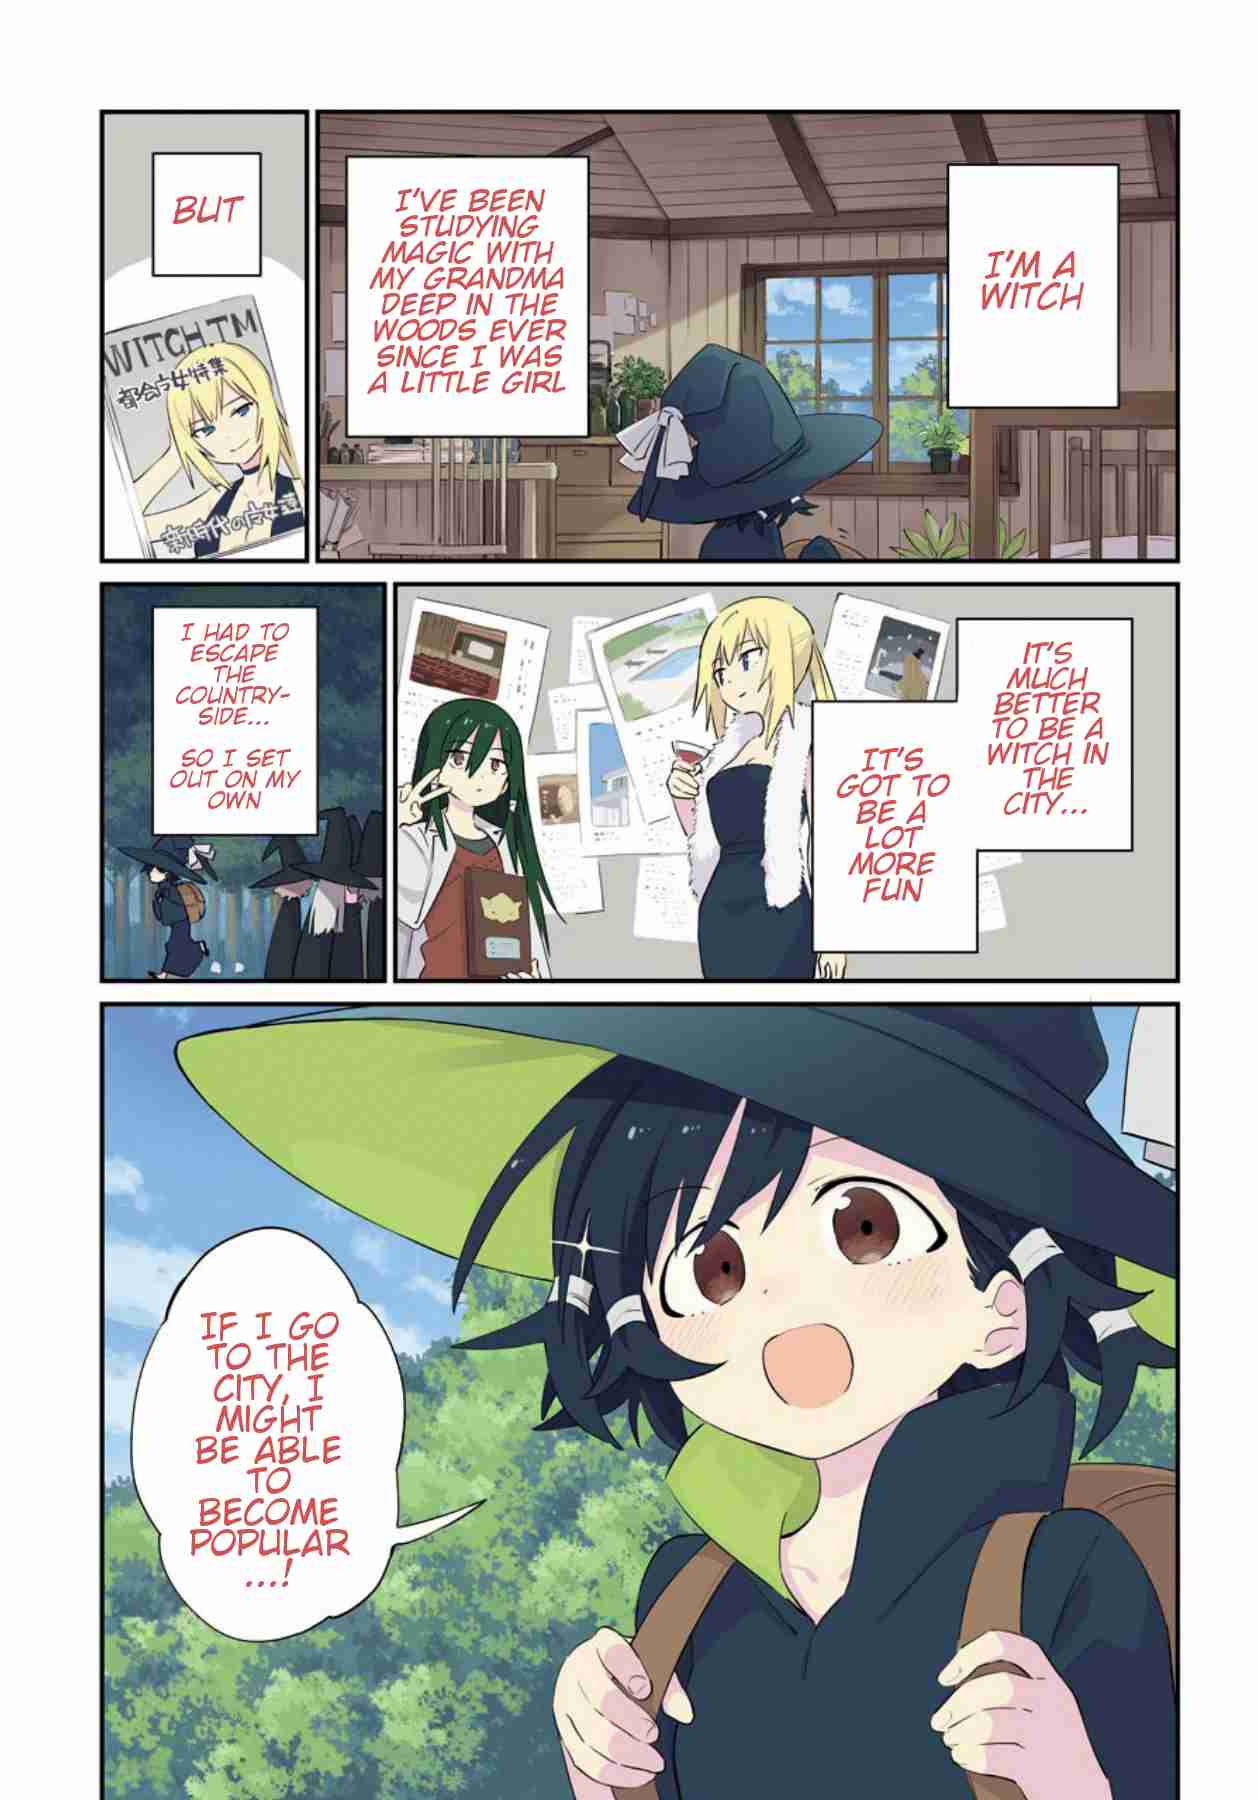 A Witch's Life in a Six Tatami Room Vol. 1 Ch. 0 Prologue